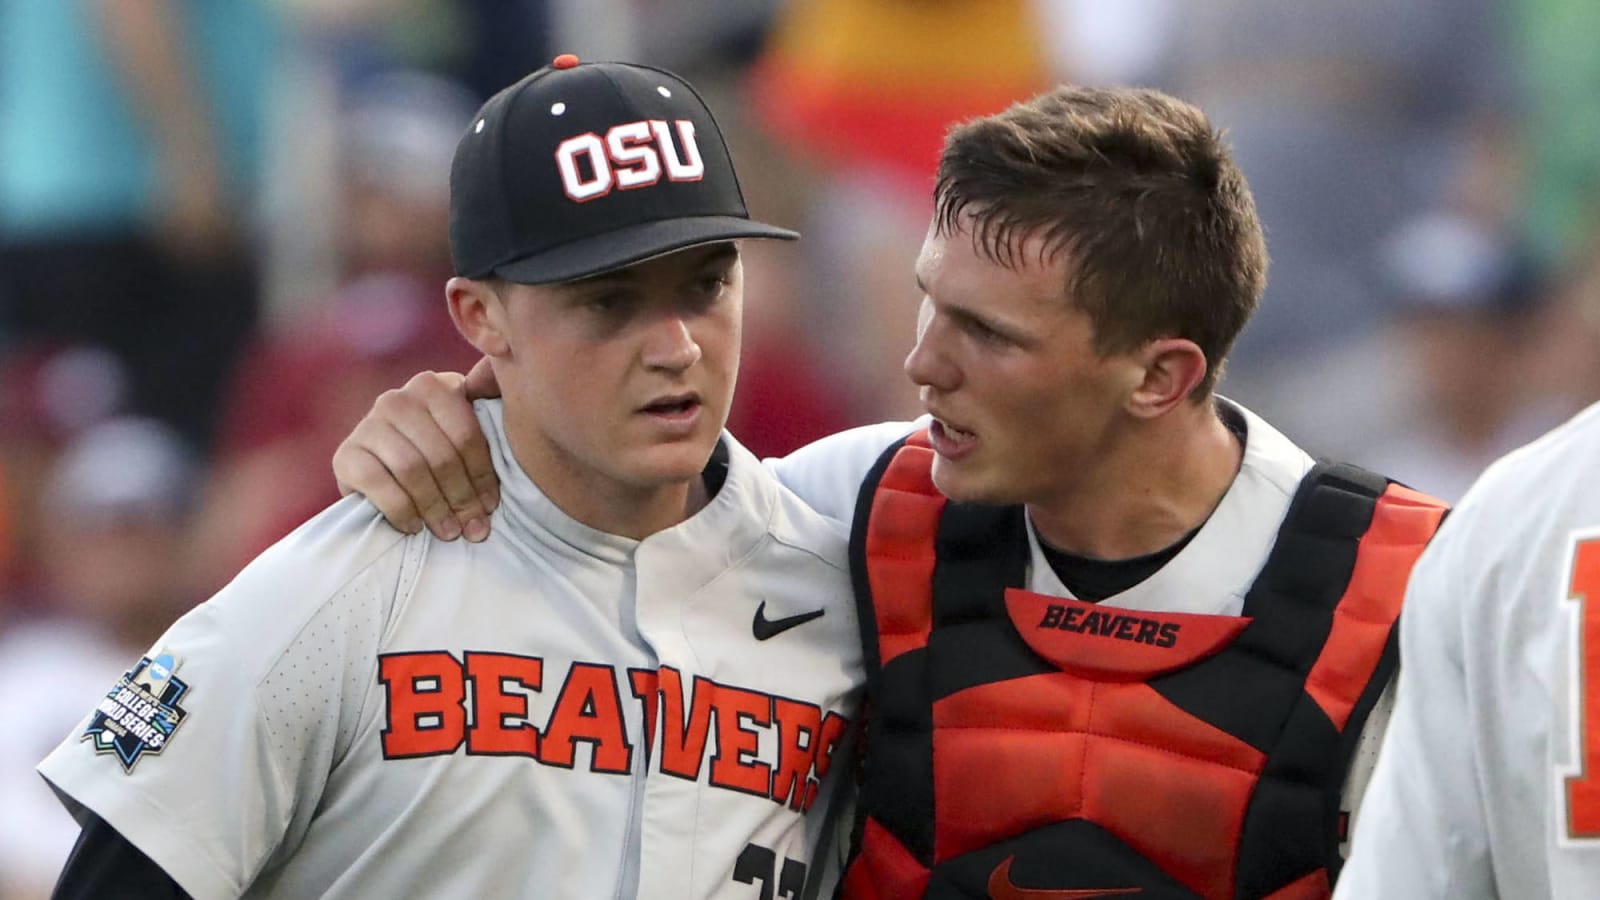 Oregon State's use of freshman pitcher in CWS was borderline excessive